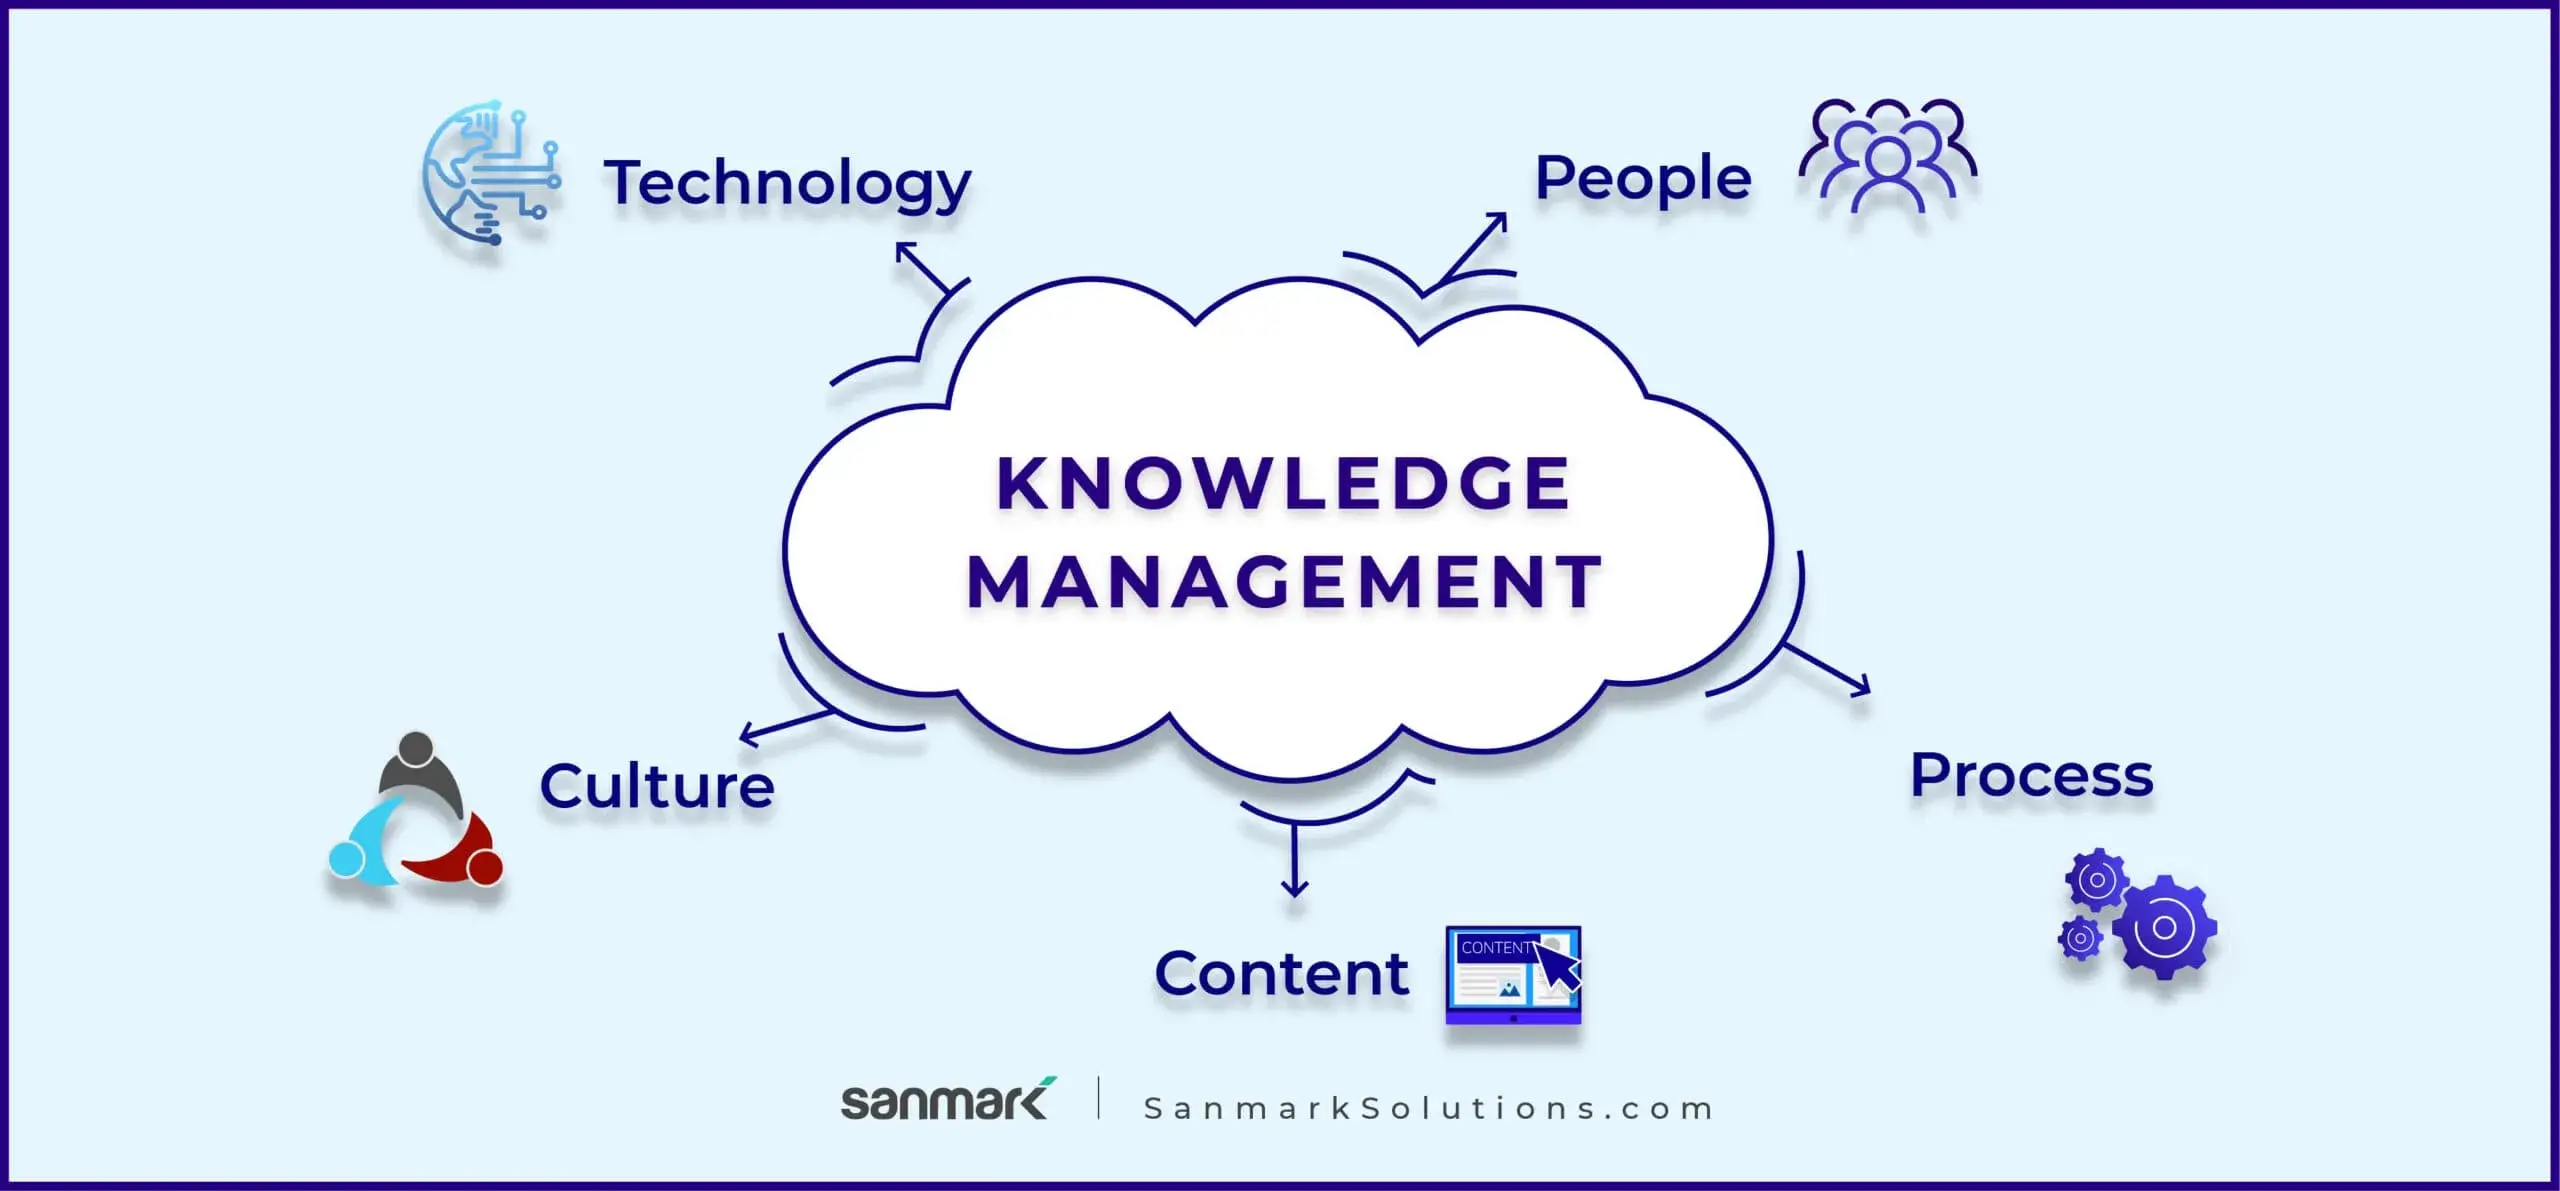 Why You Should Develop Knowledge Management in Your Firm